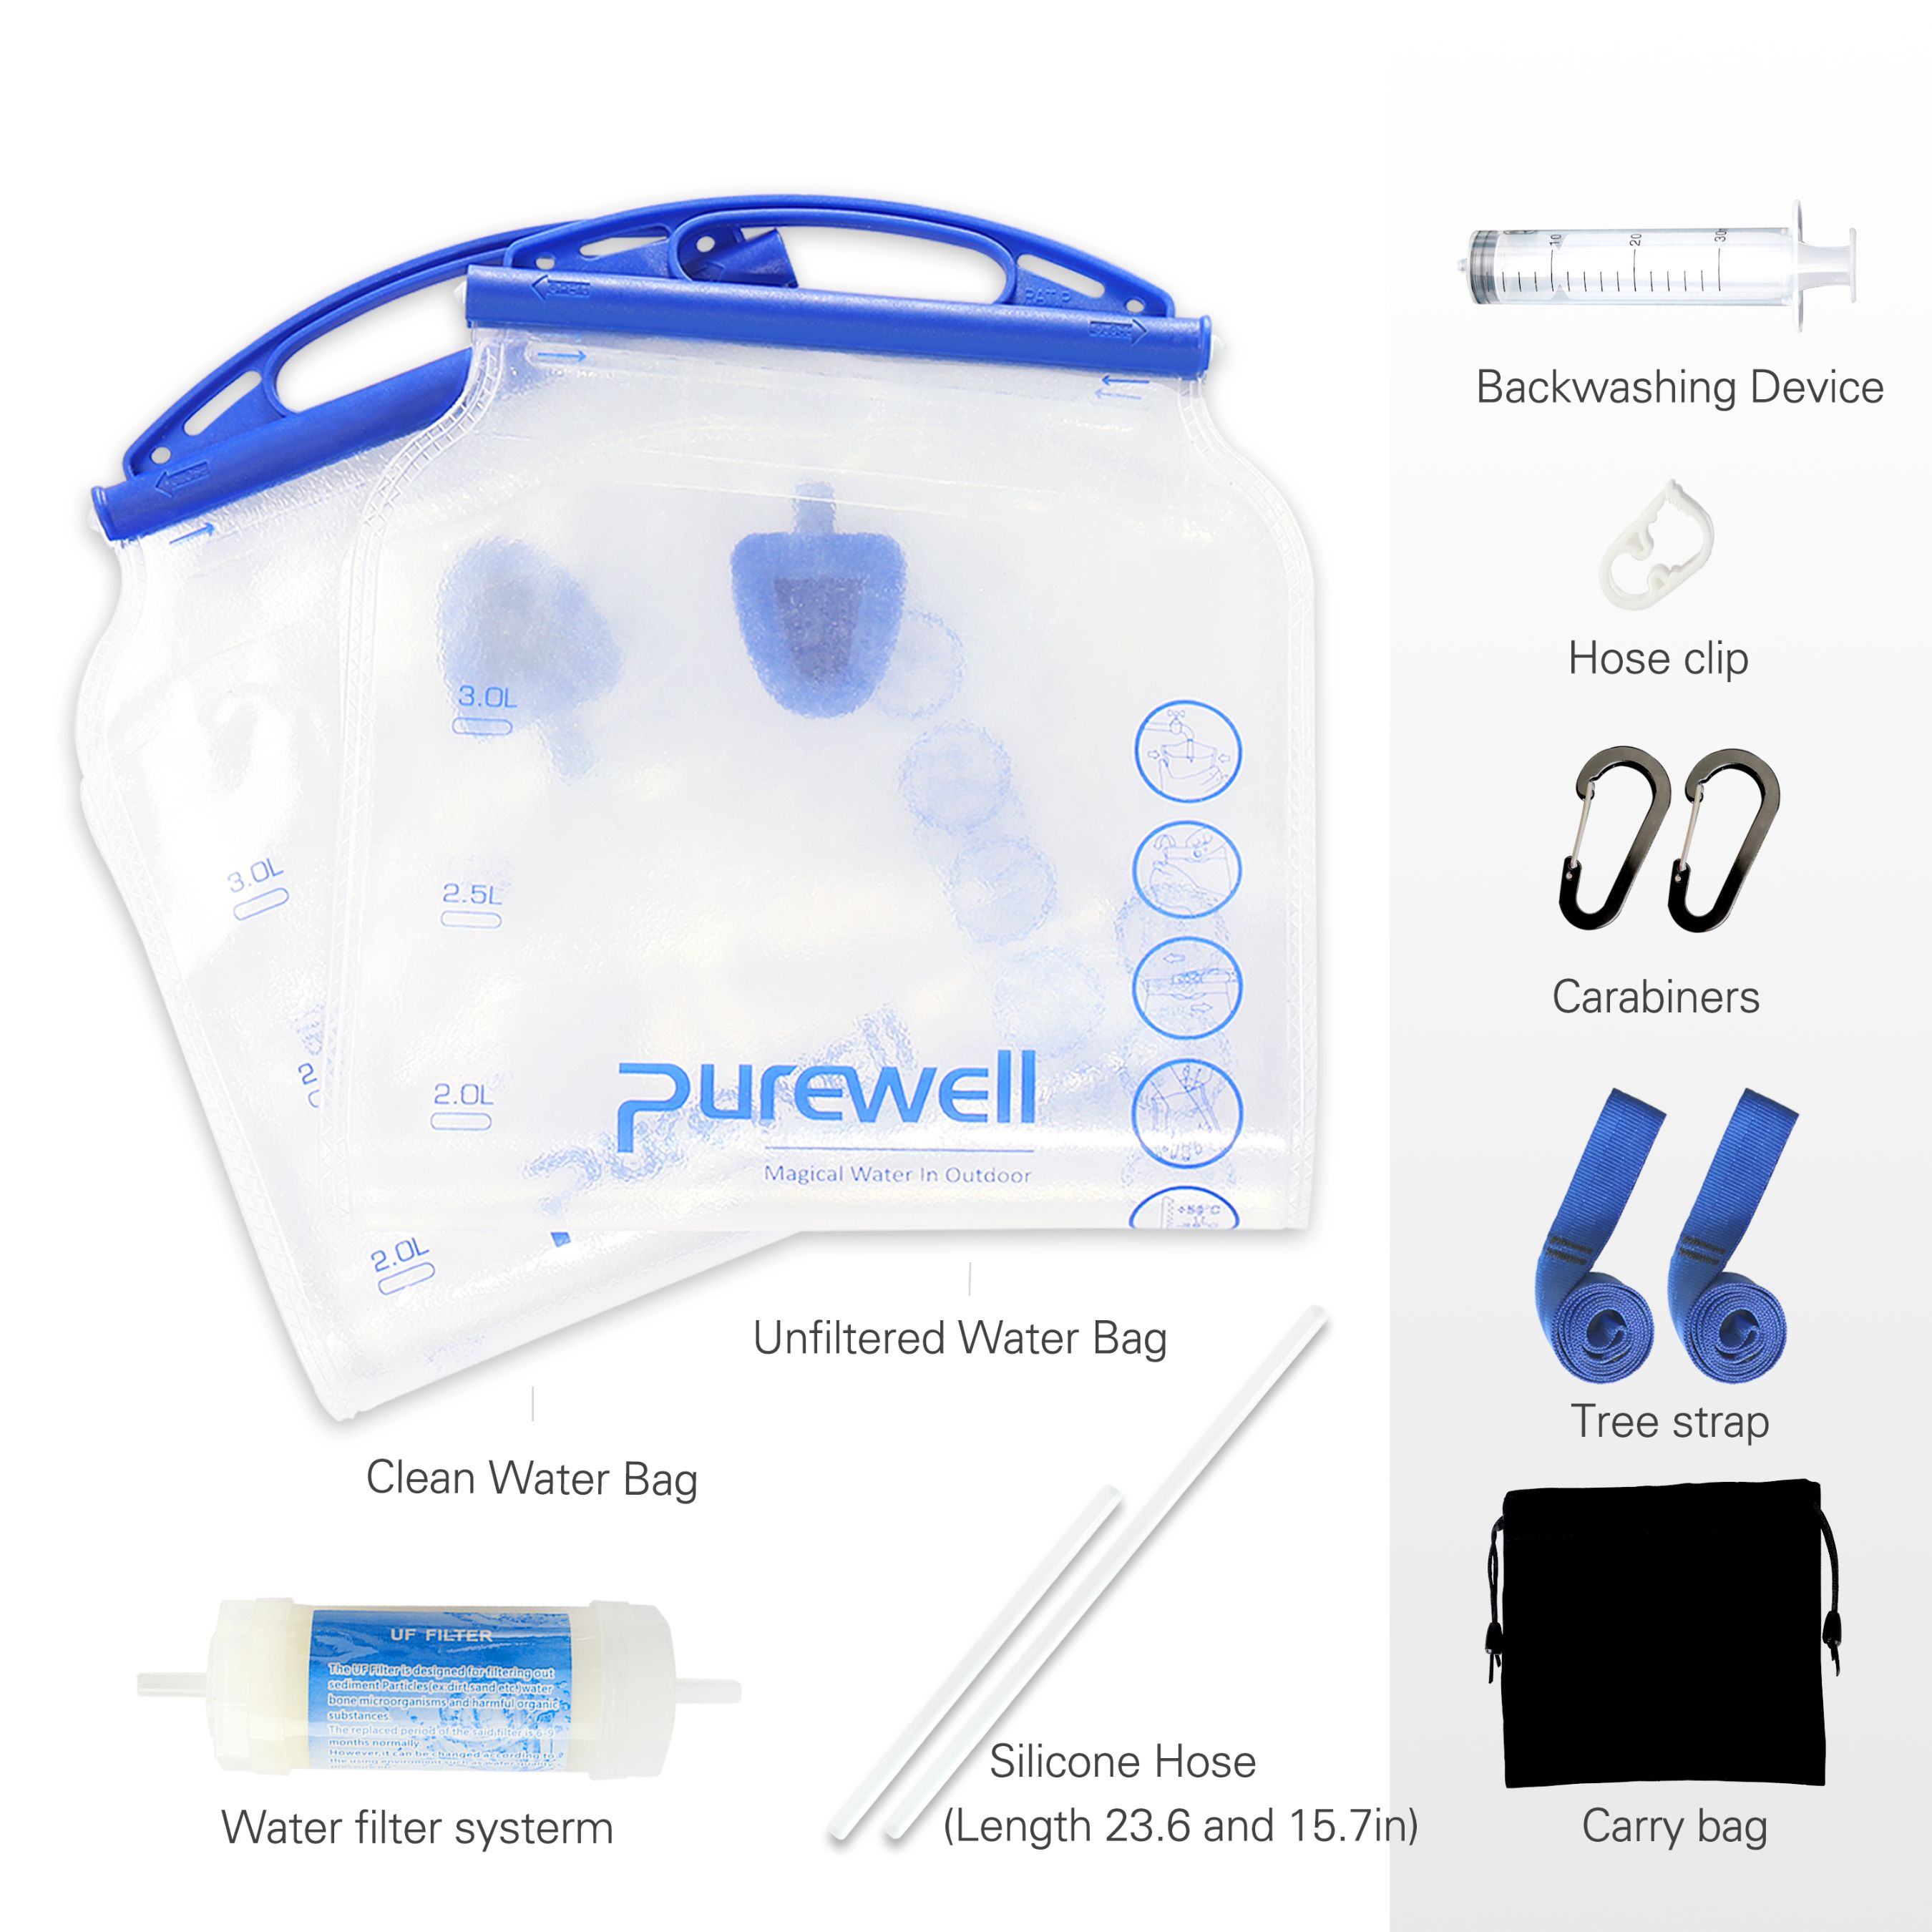 Purewell Array image361